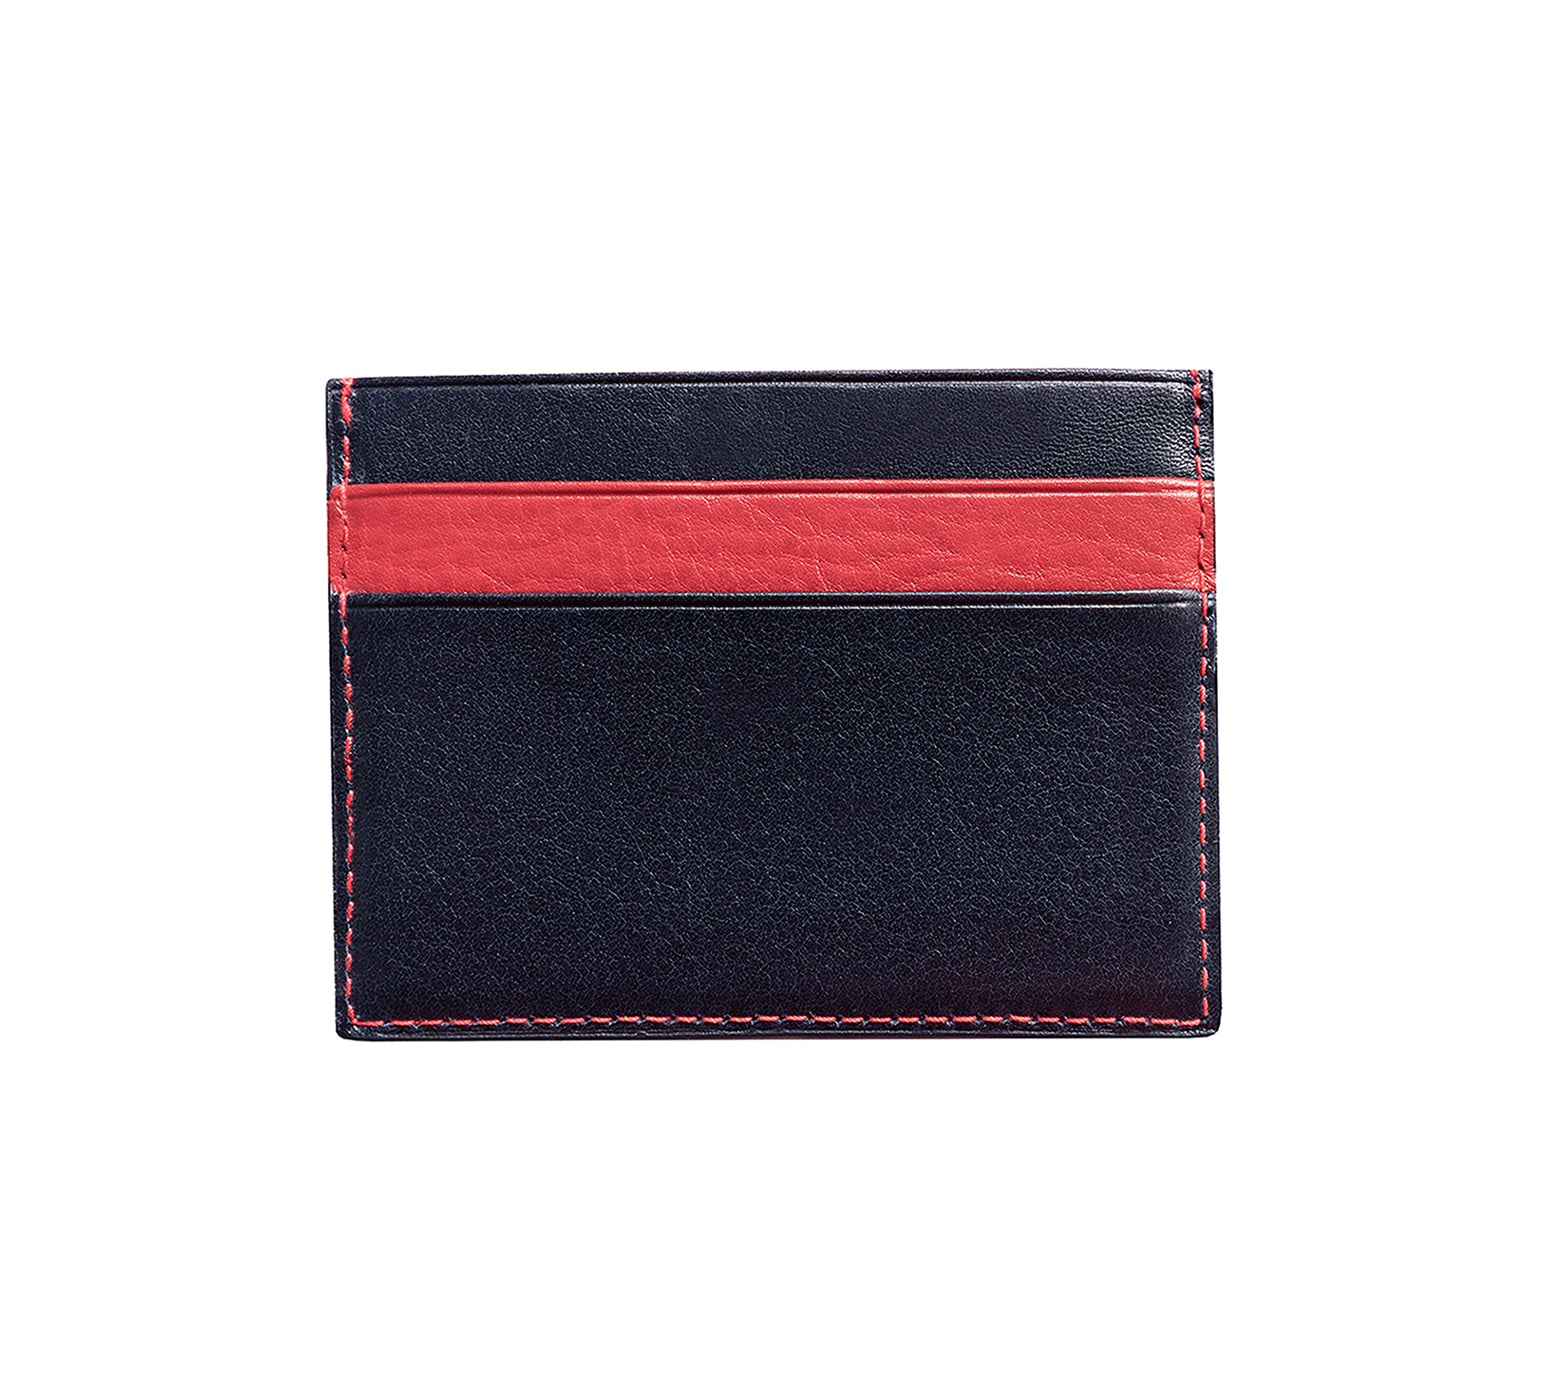 Mens Leather Card Holder in 'Royal Blue/Red' showing reverse side.